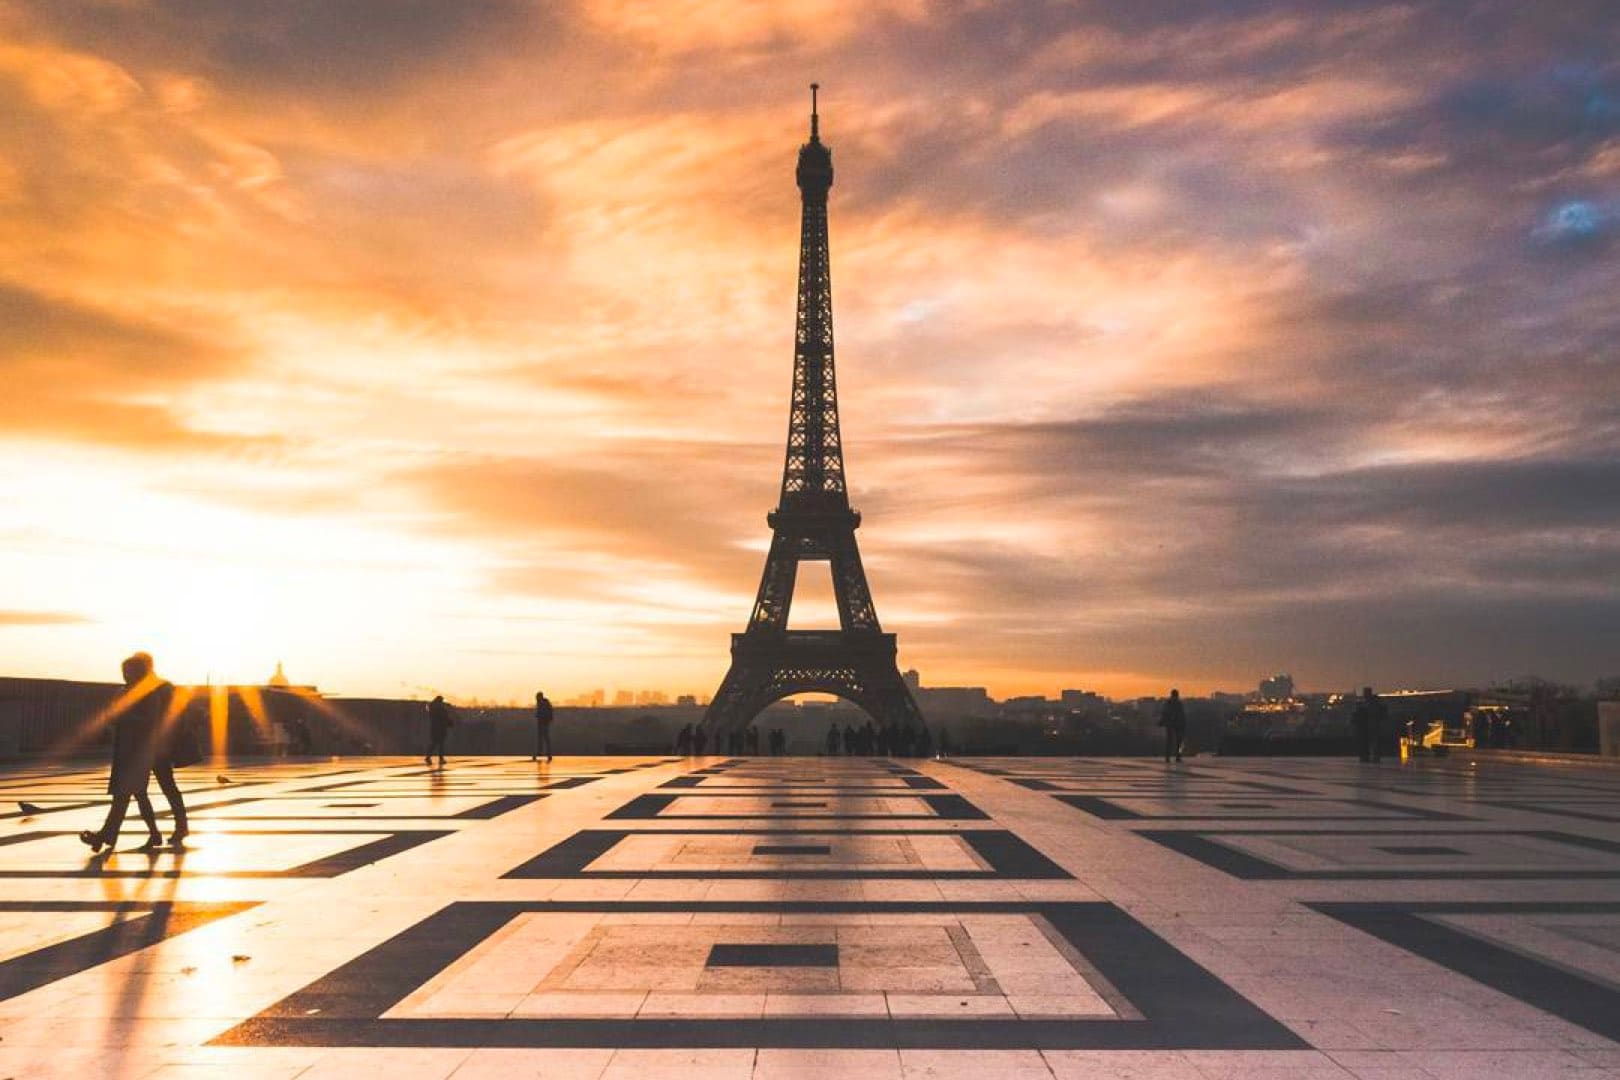 10 best Eiffel Tower views + free included! -